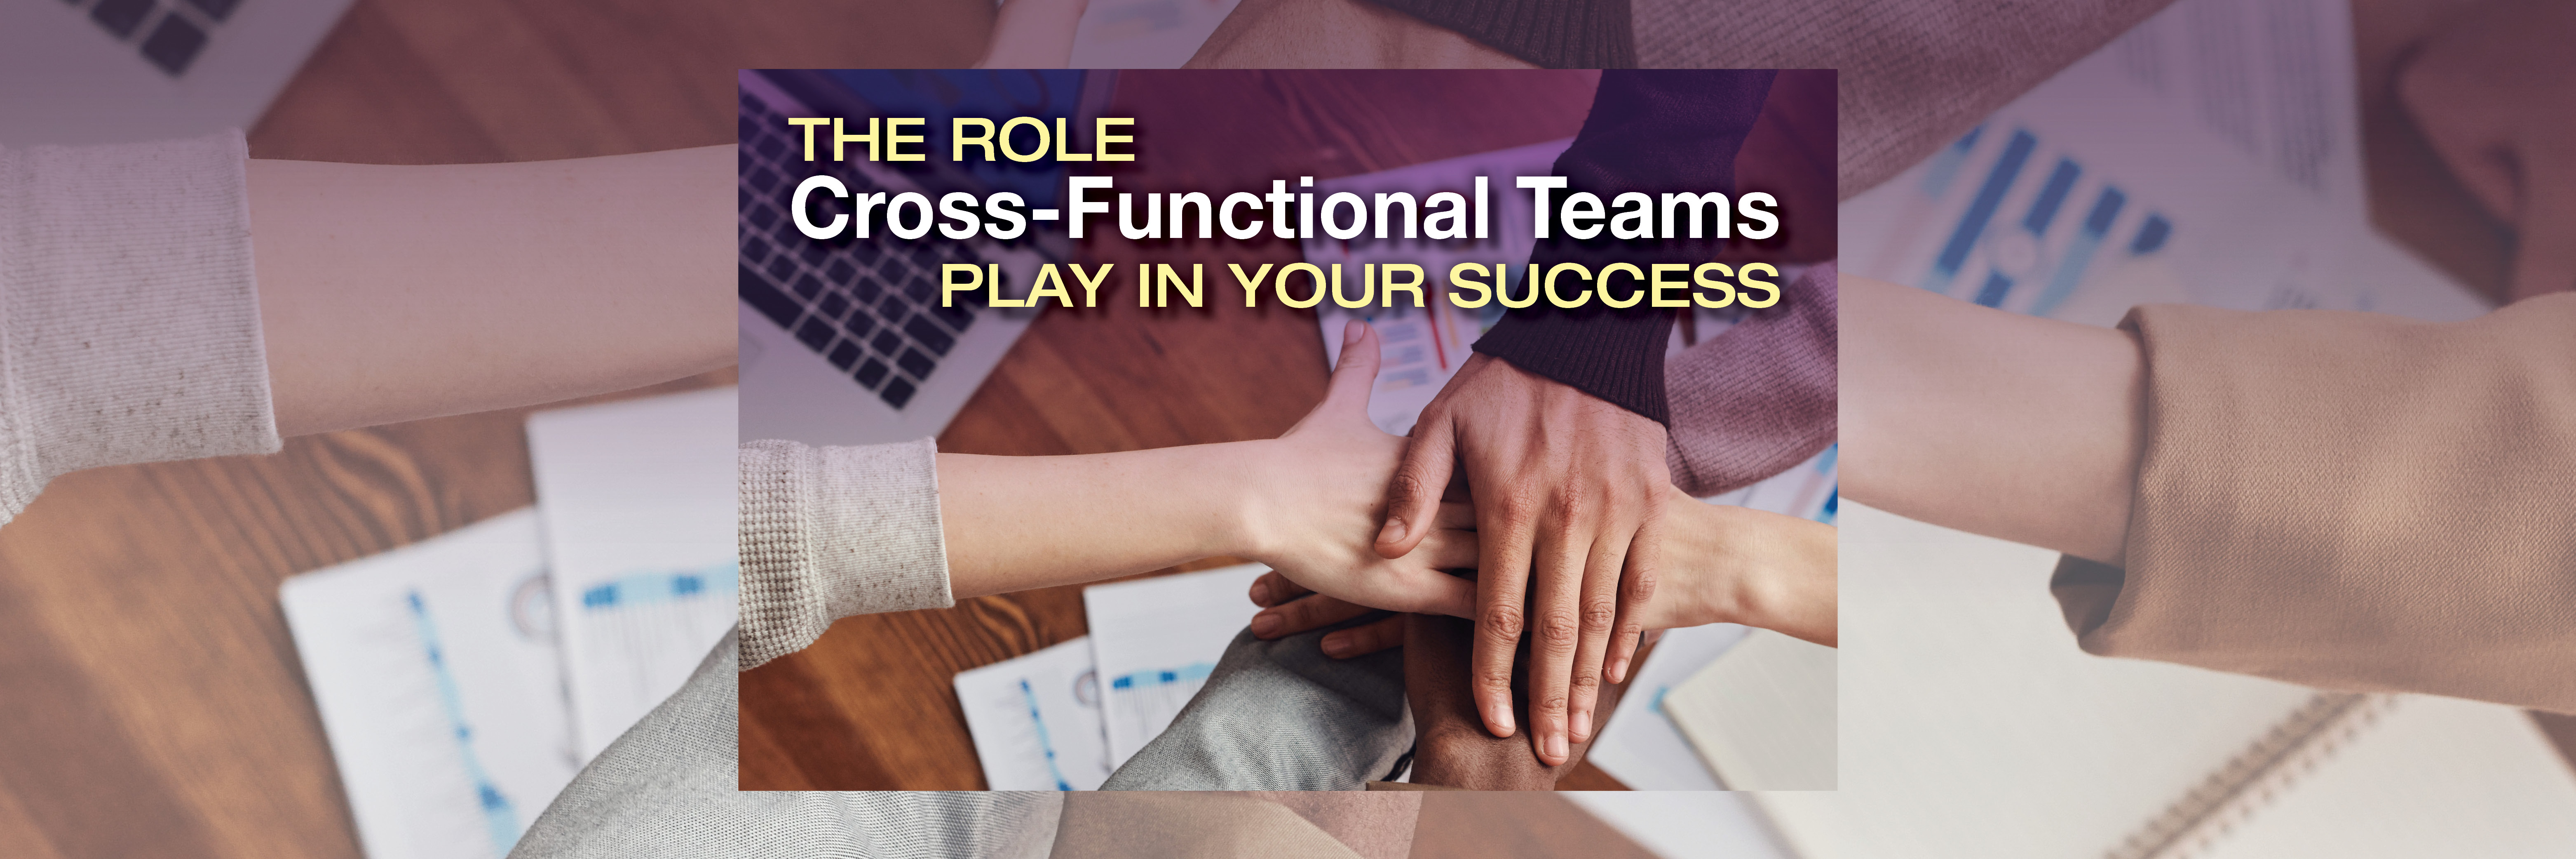 Cross-Functional Teams Play a Critical Role in Your Success